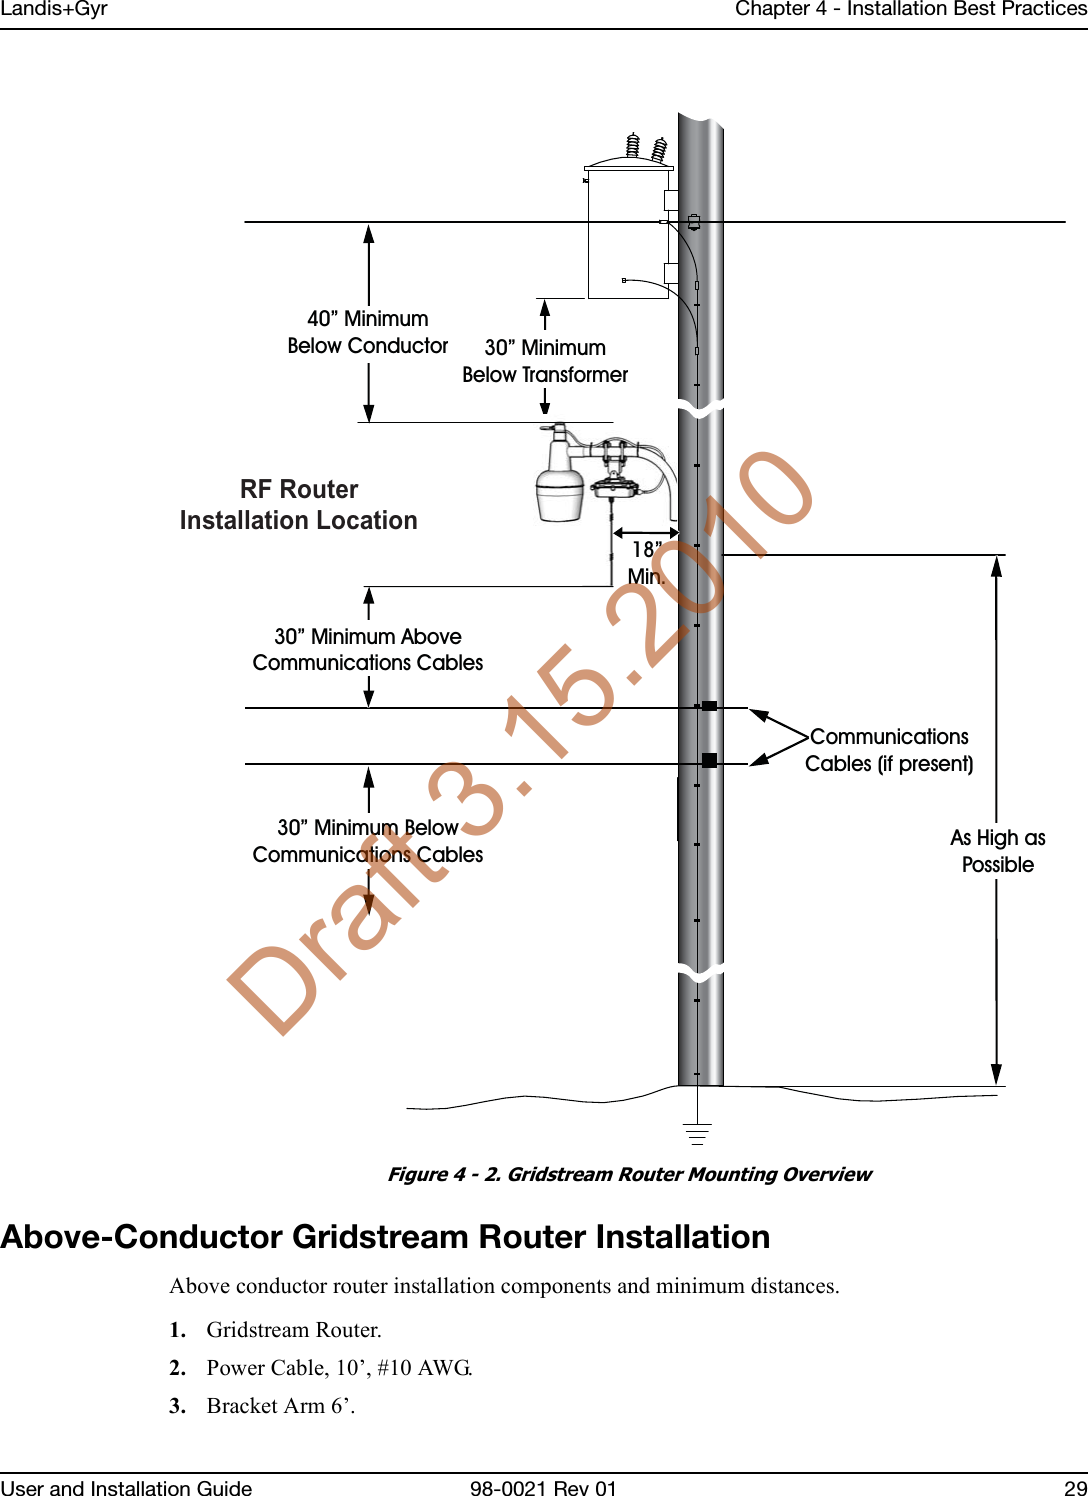 Landis+Gyr Chapter 4 - Installation Best PracticesUser and Installation Guide 98-0021 Rev 01 29Figure 4 - 2. Gridstream Router Mounting OverviewAbove-Conductor Gridstream Router InstallationAbove conductor router installation components and minimum distances.1. Gridstream Router.2. Power Cable, 10’, #10 AWG.3. Bracket Arm 6’.CommunicationsCables (if present)RF RouterInstallation Location30” MinimumBelow Transformer40” MinimumBelow Conductor30” Minimum BelowCommunications Cables30” Minimum AboveCommunications CablesAs High asPossible18”Min.Draft 3.15.2010